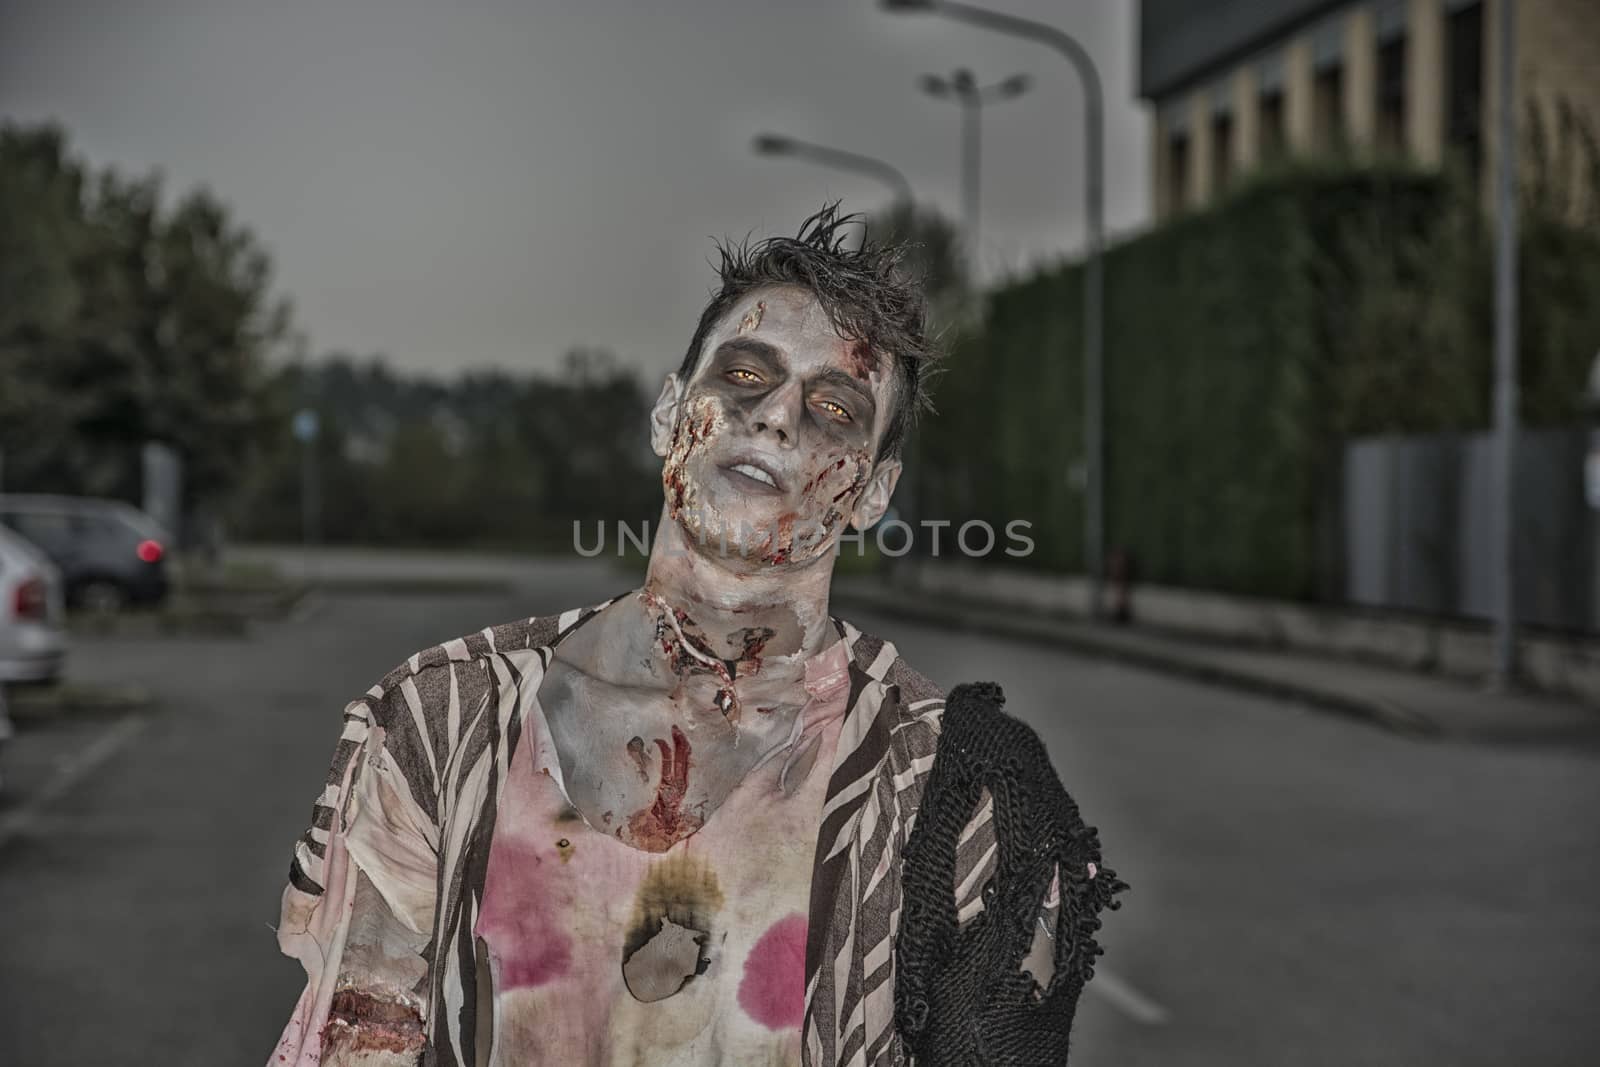 One male zombie standing in empty city street on Halloween by artofphoto